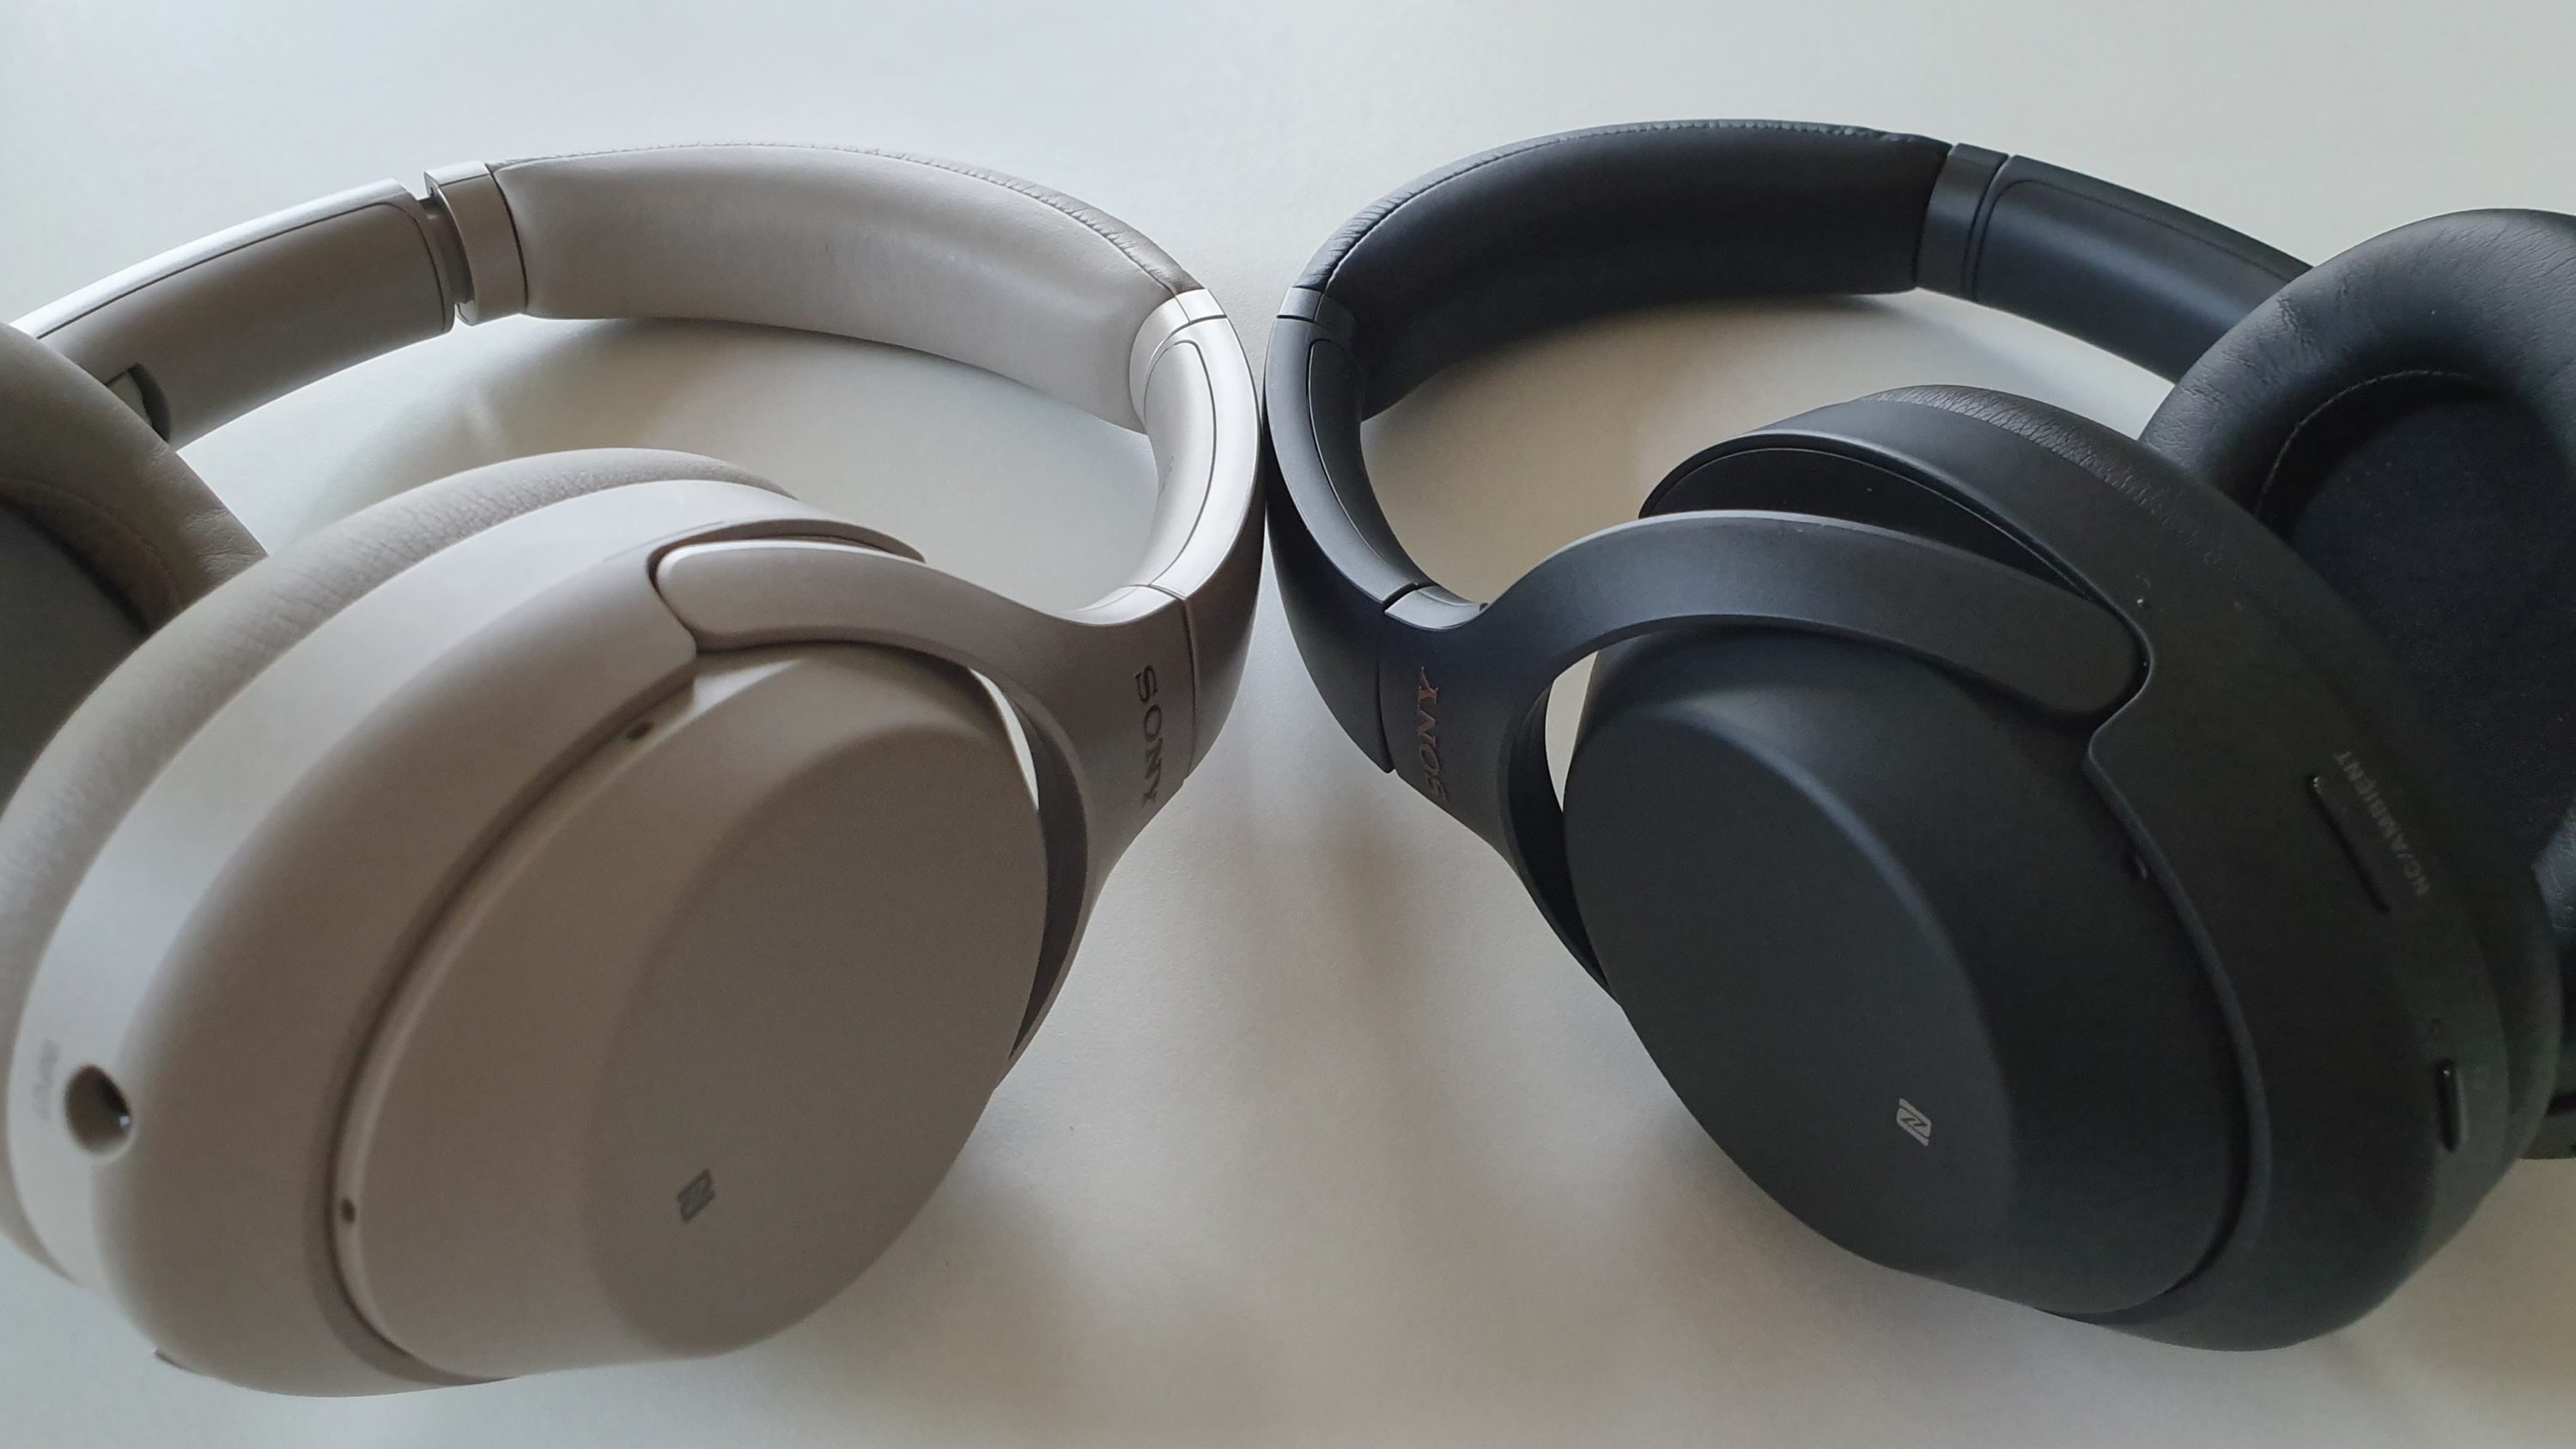 Sony WH-1000XM3: King of Noise Cancelling Headphones?